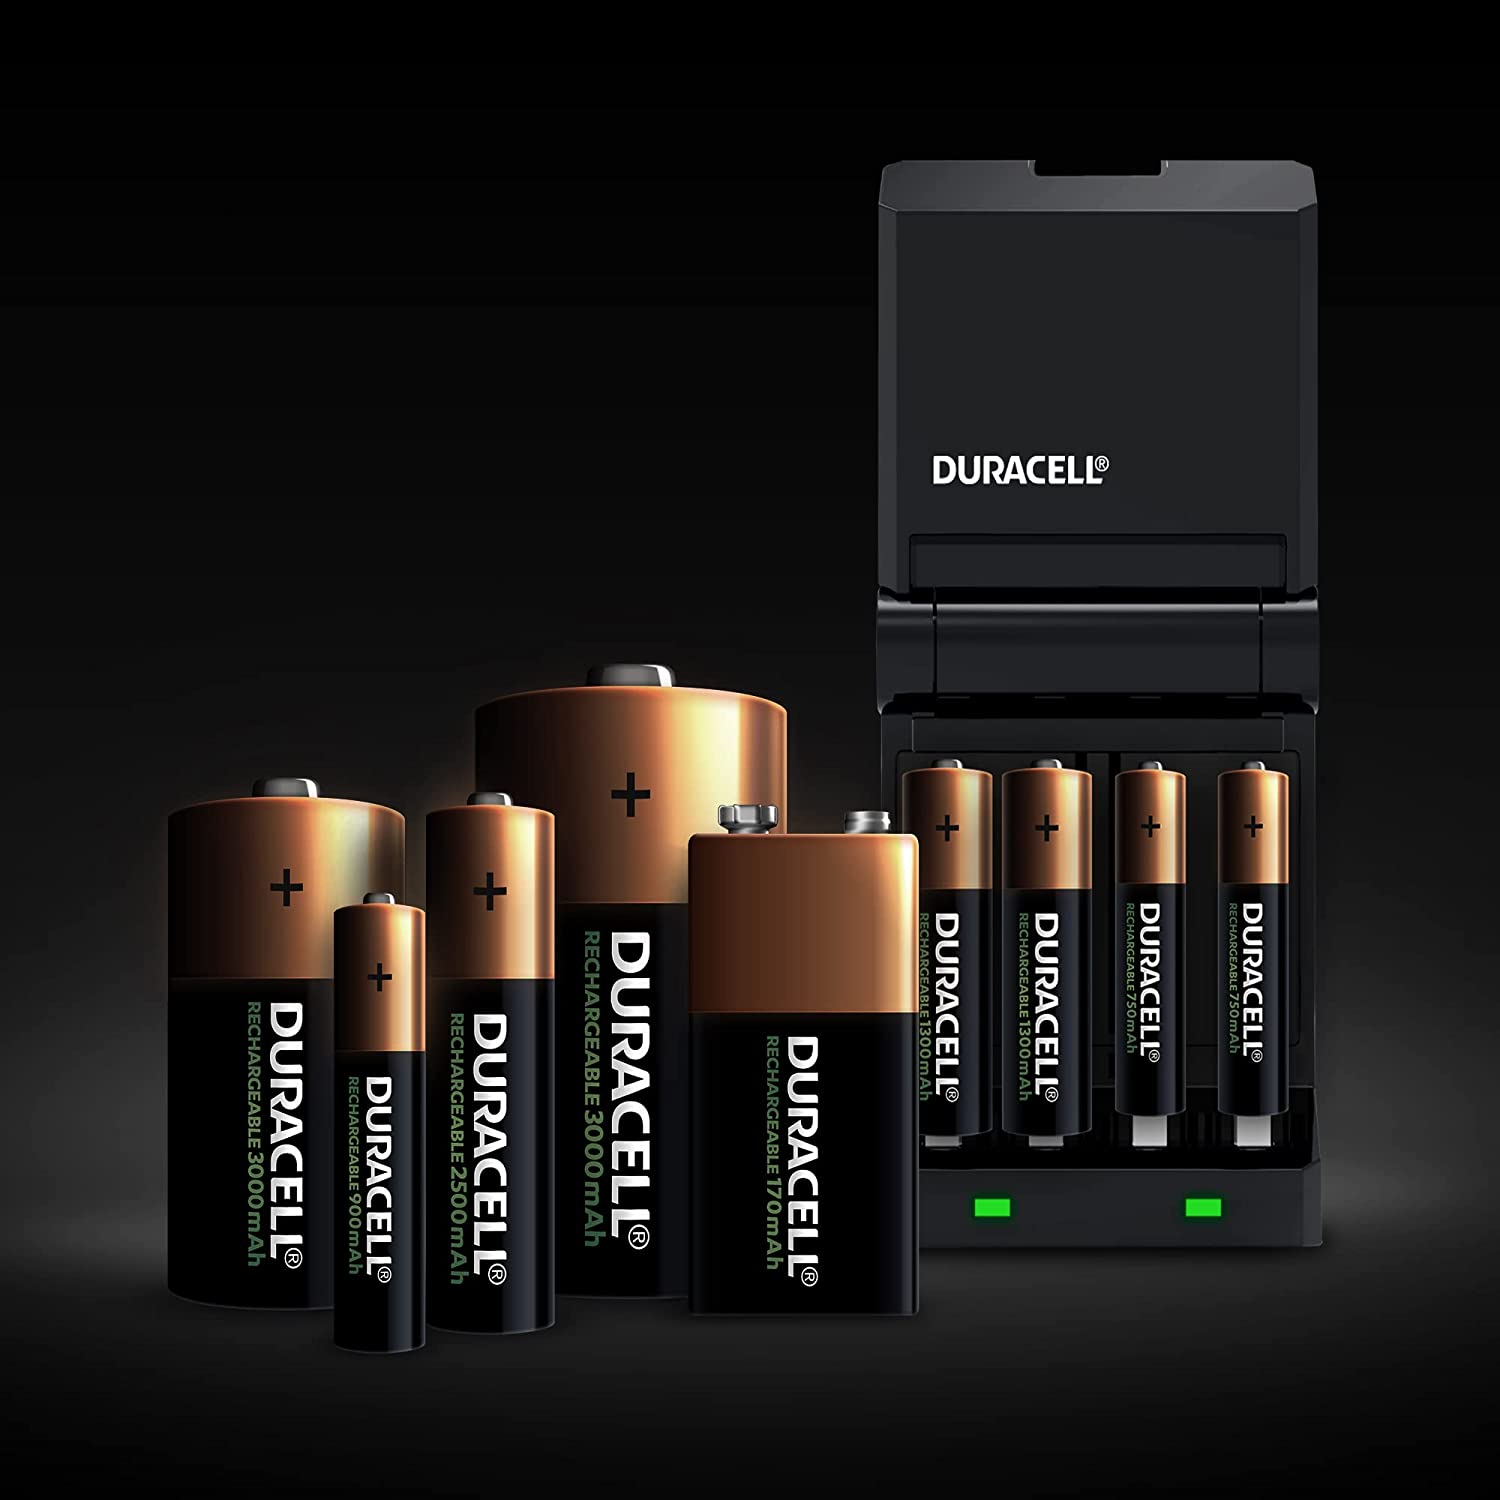 Duracell Rechargeable D 3000 mAh Batteries, pack of 2